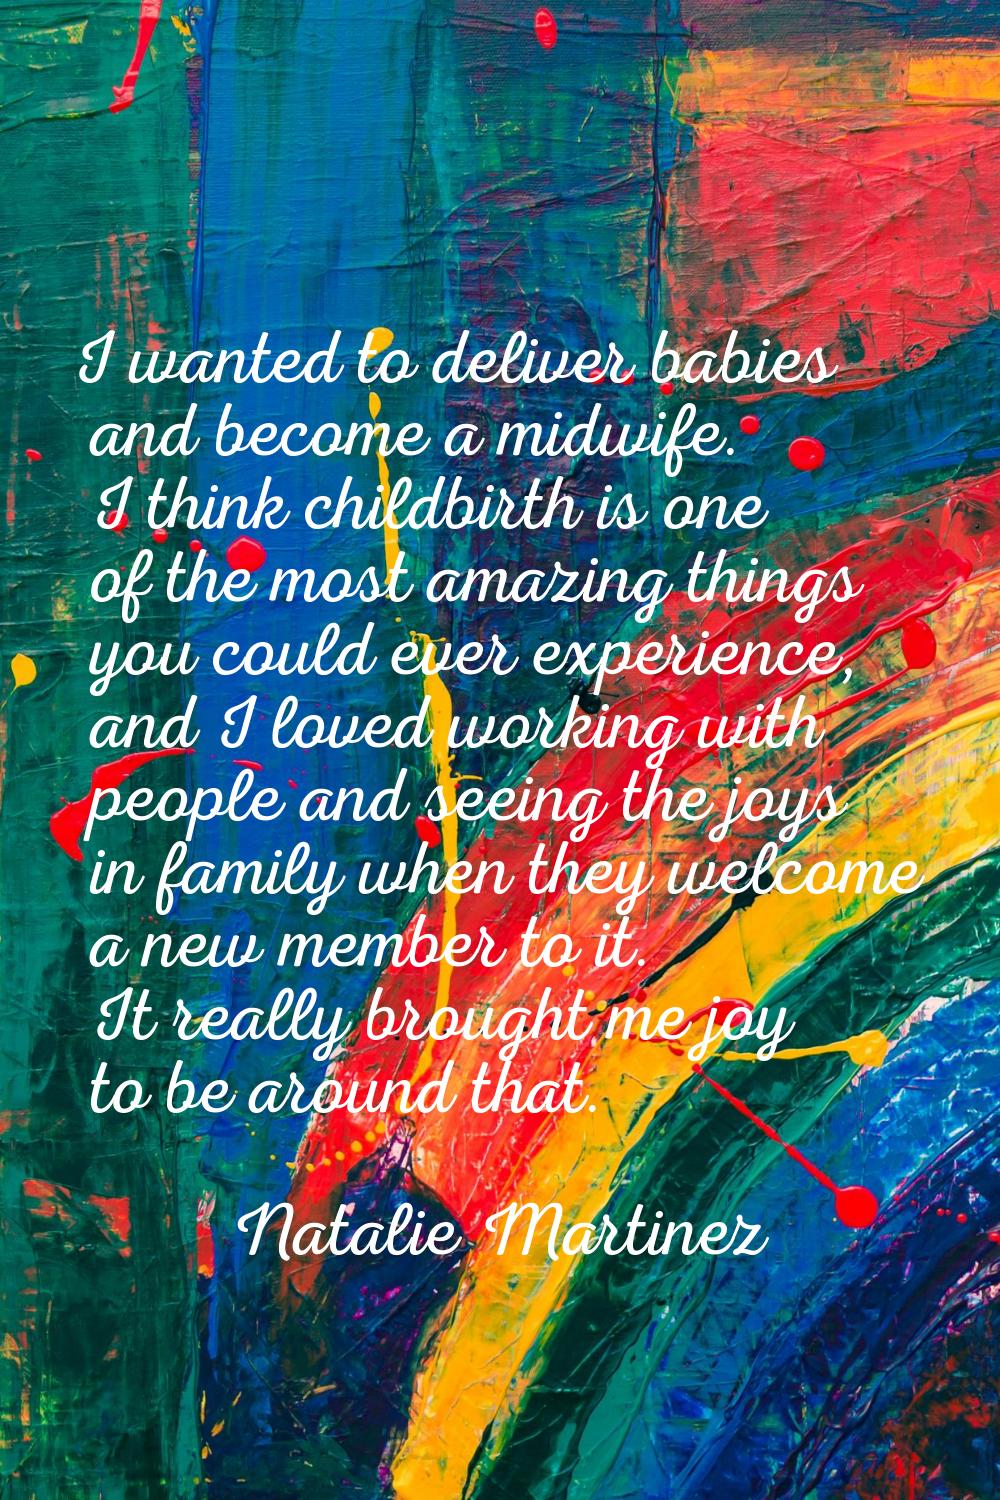 I wanted to deliver babies and become a midwife. I think childbirth is one of the most amazing thin